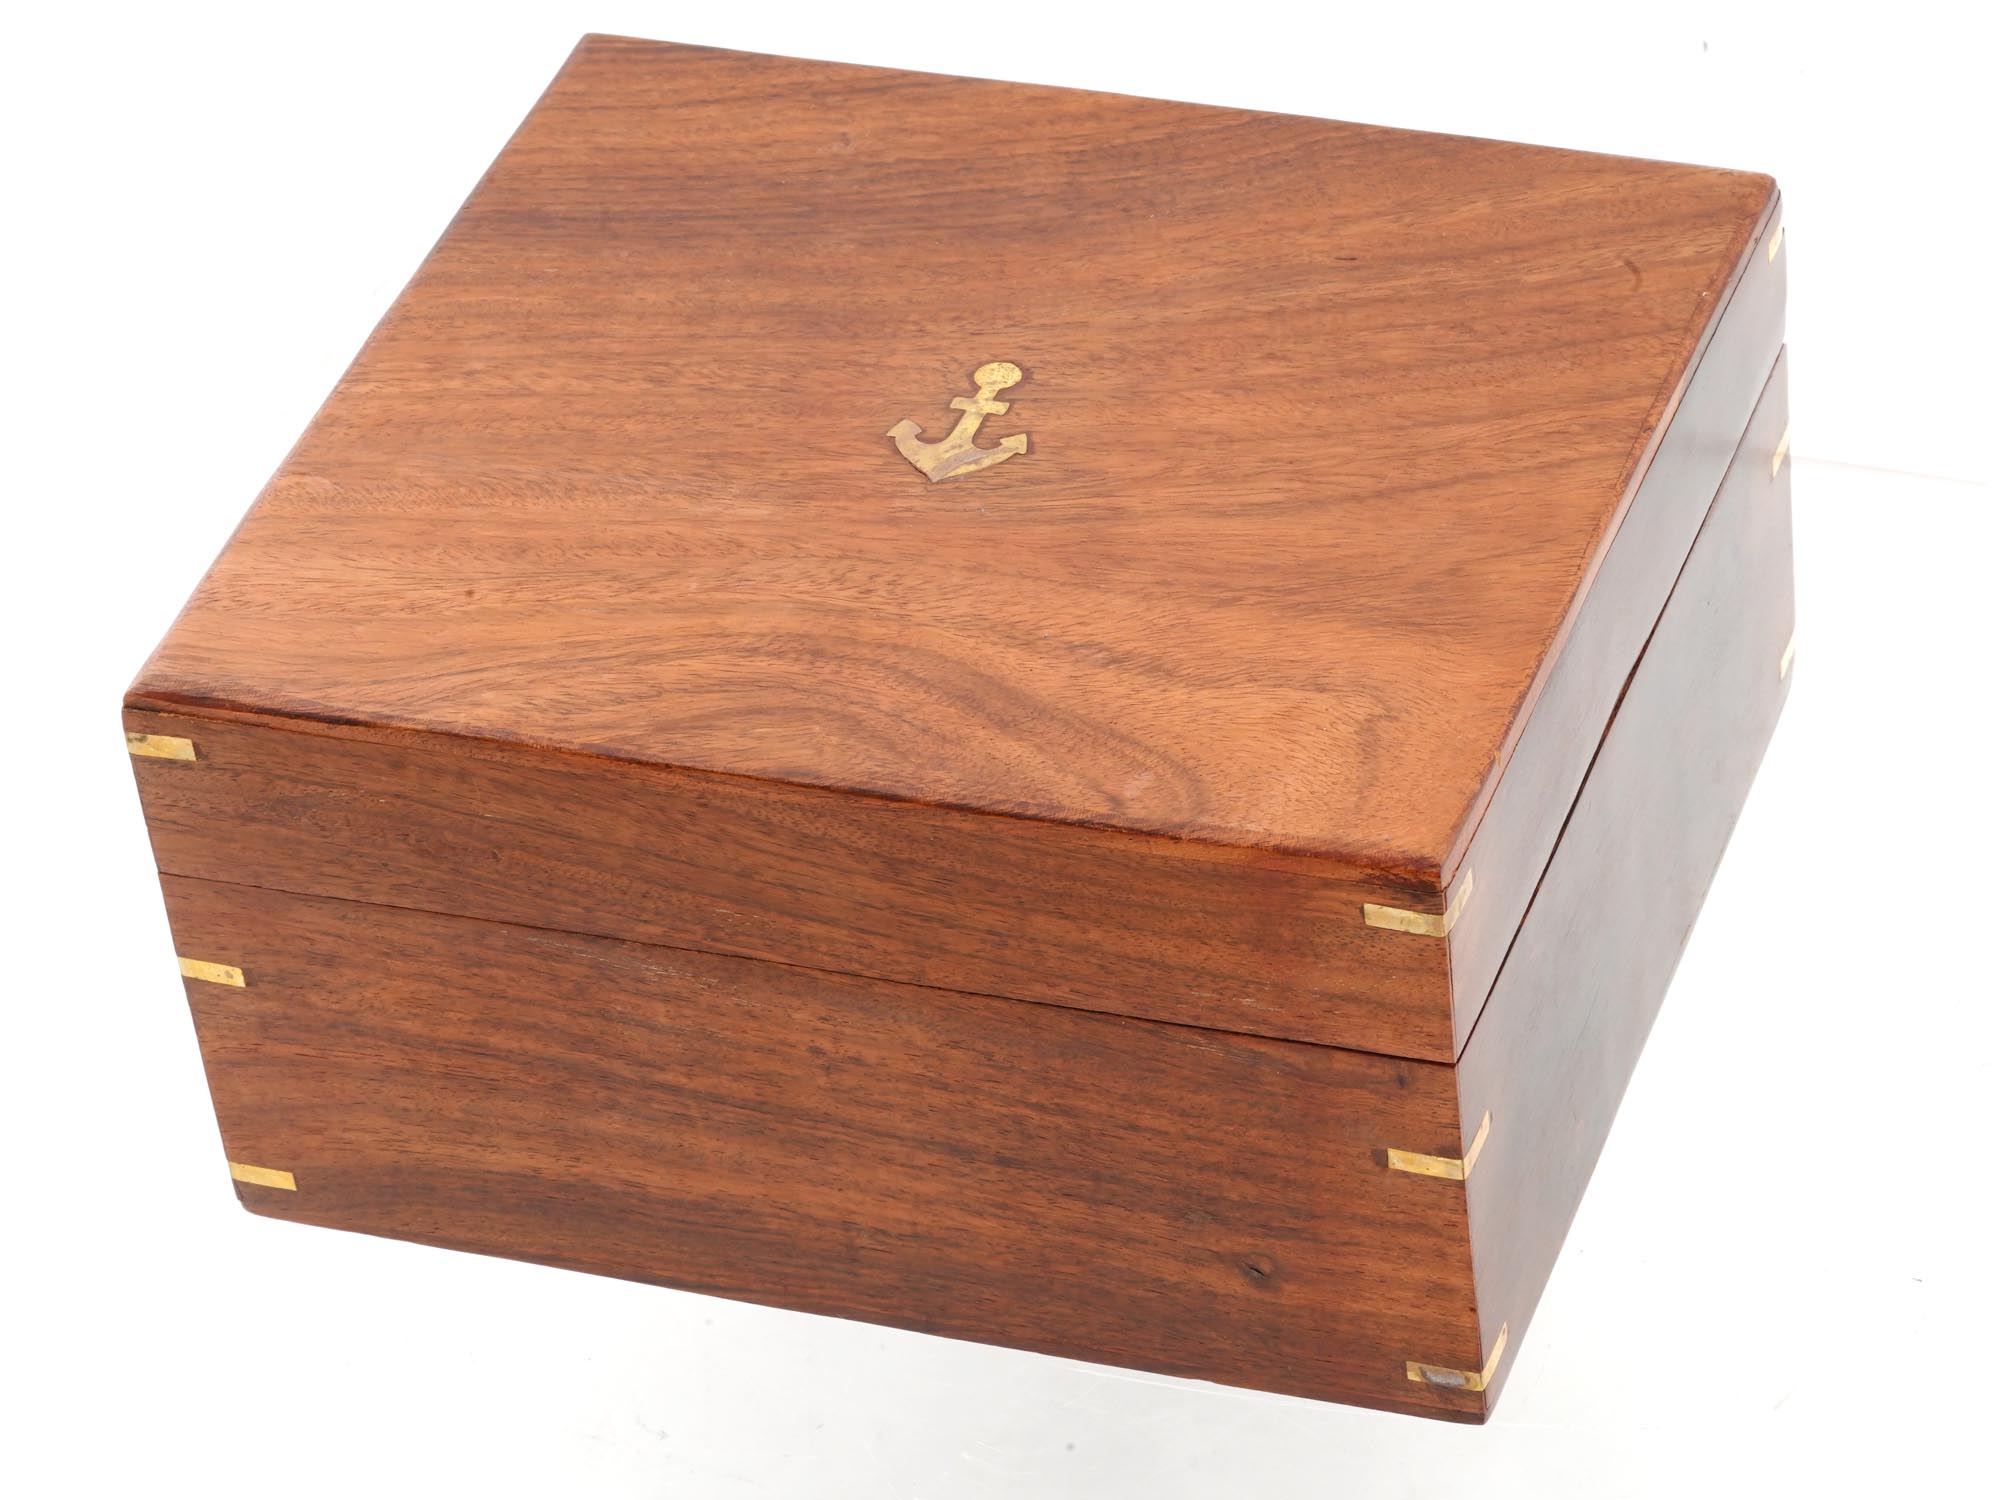 MARINE WOODEN CIGAR BOX WITH ANCHOR DESIGN ON LID PIC-0